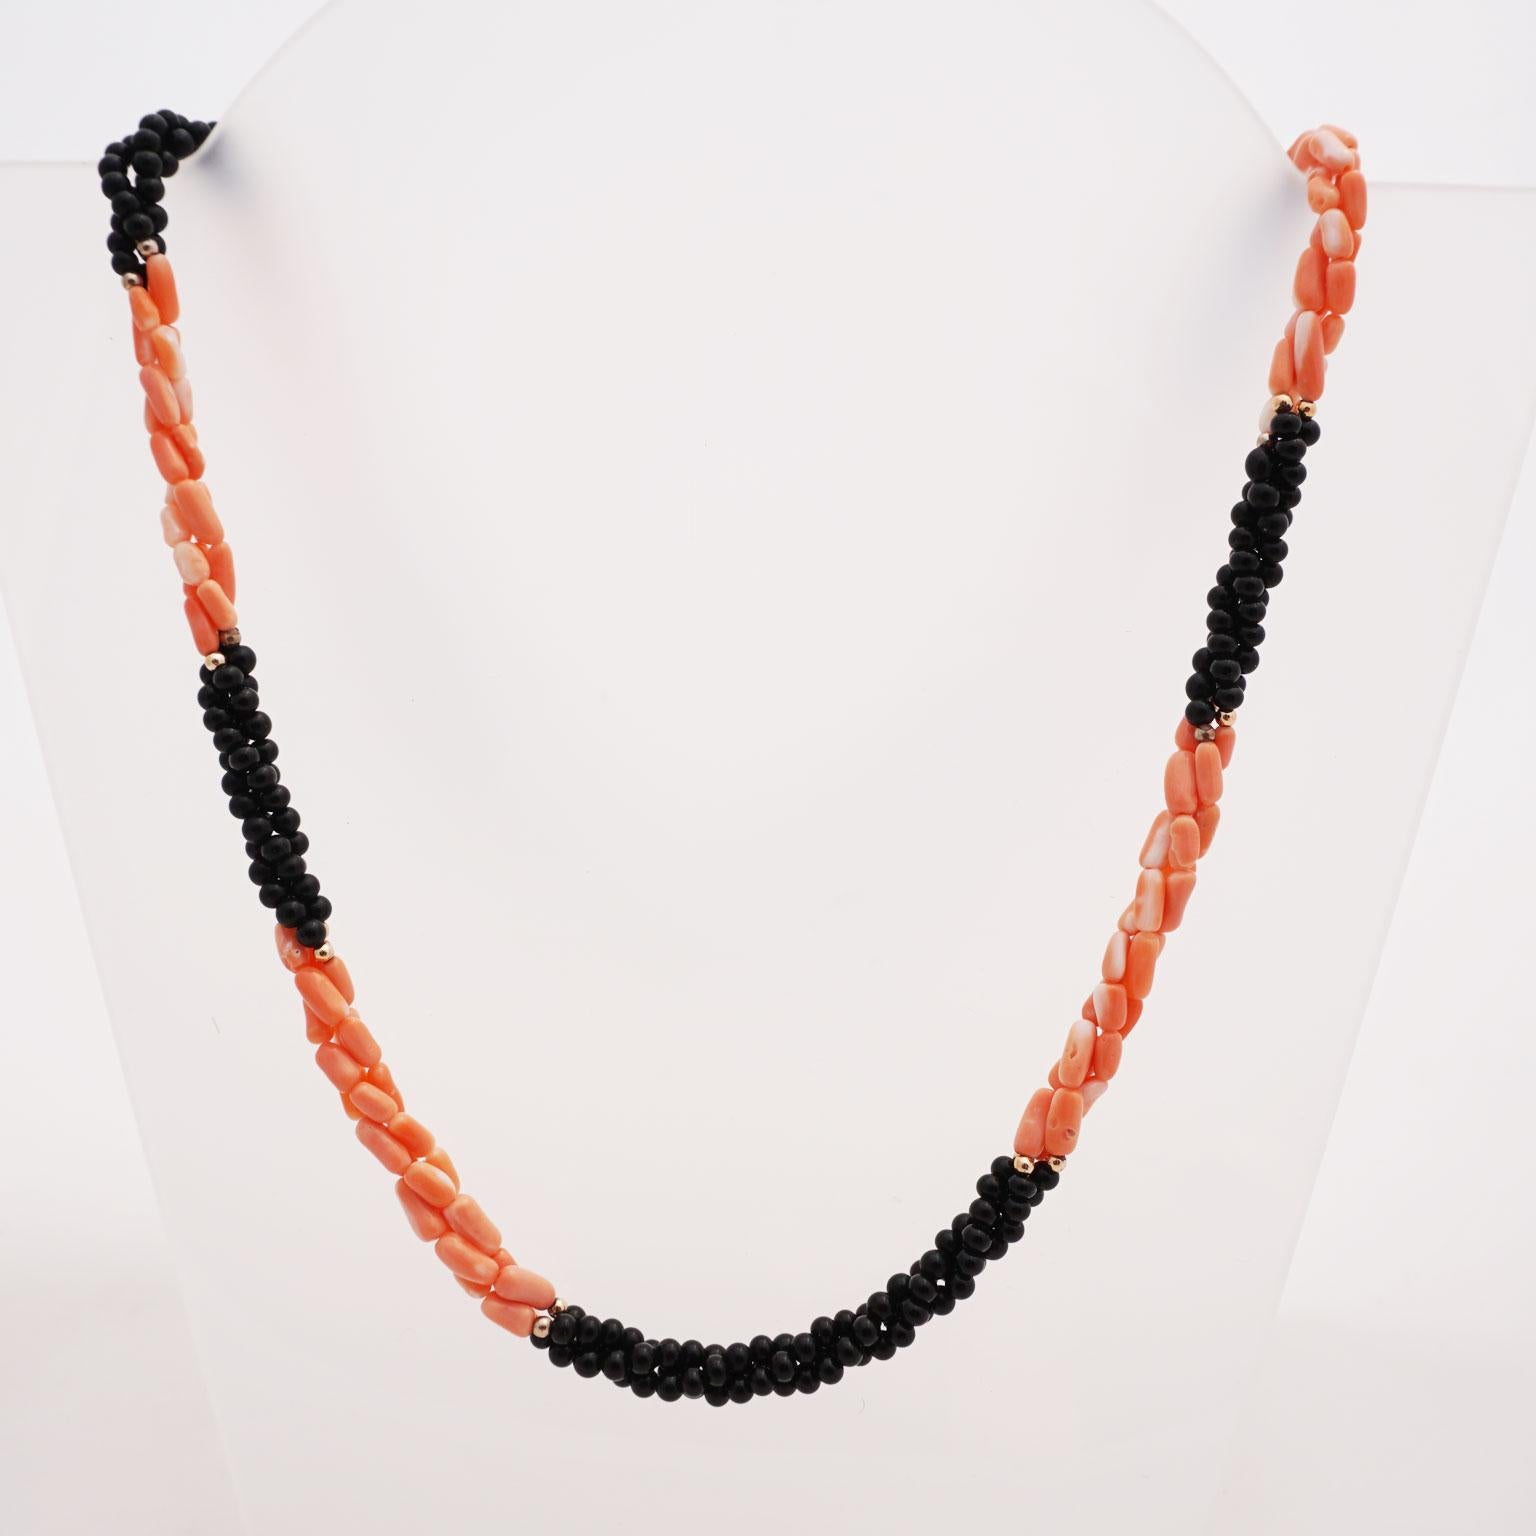 Ensemble of bracelet and necklace coral and onyx
In this fine piece of jewellery, coral and onyx are woven together on several strands. With this classic material mix the deep black onyx and the delicate pink coral come to the fore particularly